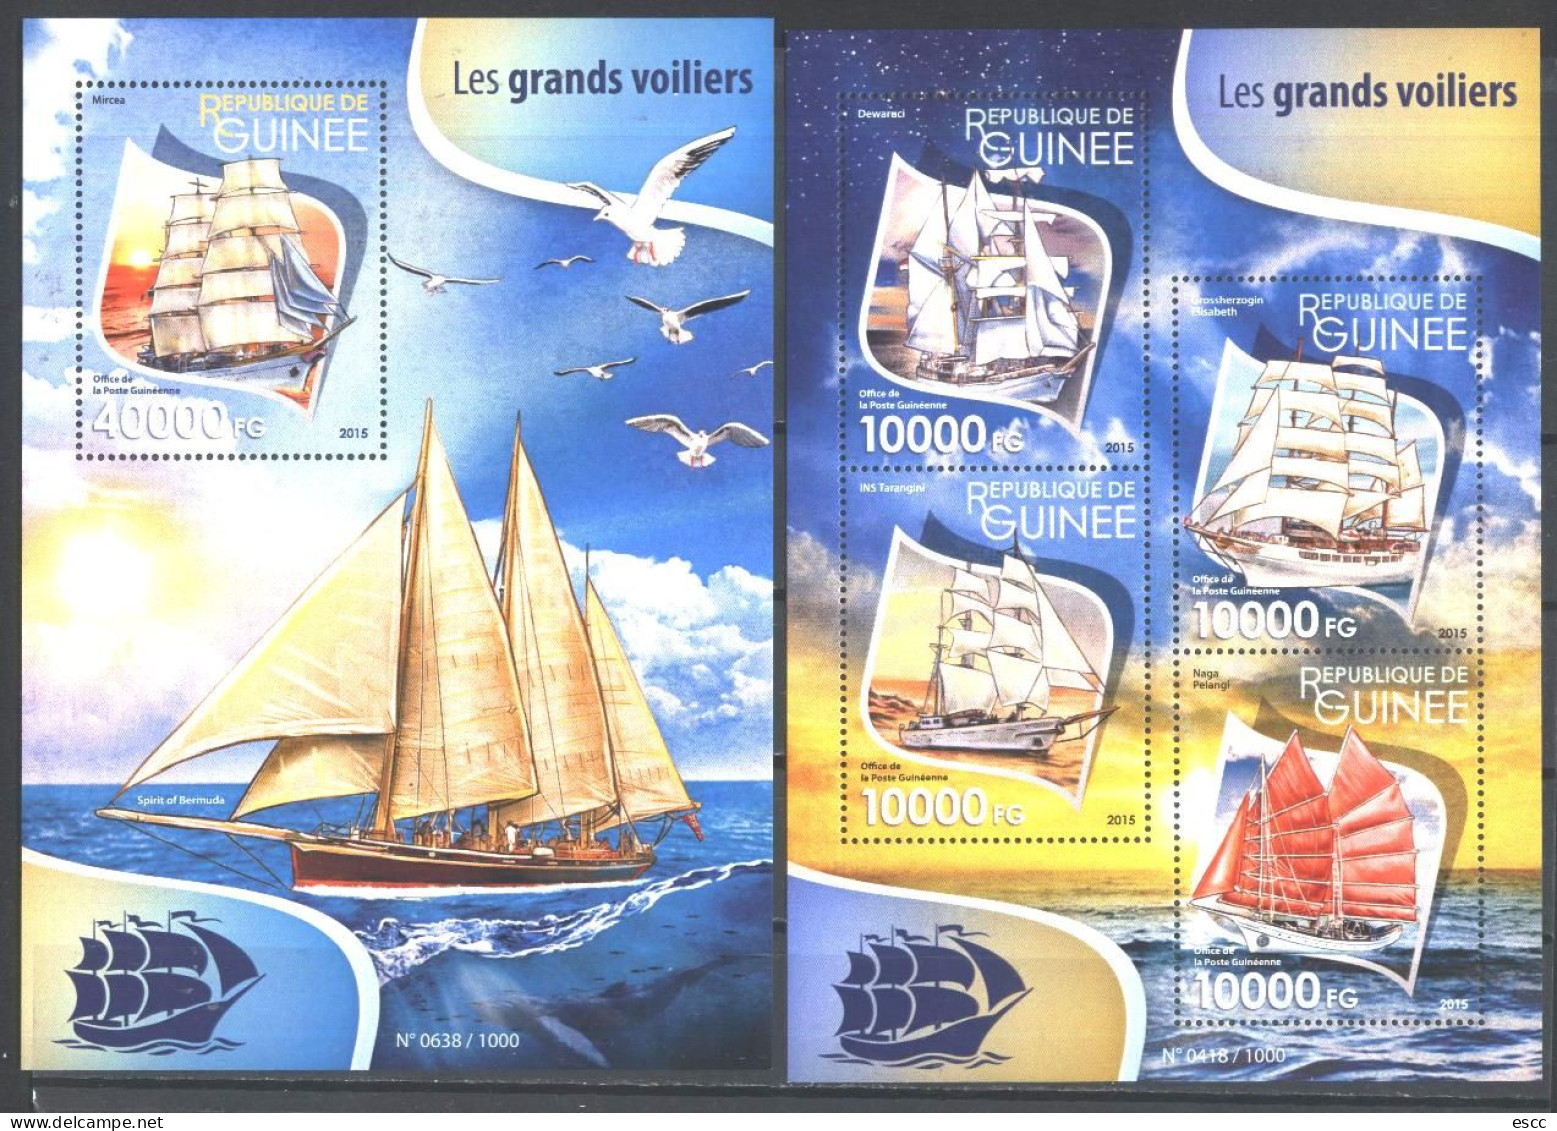 Mint Stamps In Miniature Sheet Abd S/S Ships  2015  From Guinea - Bateaux